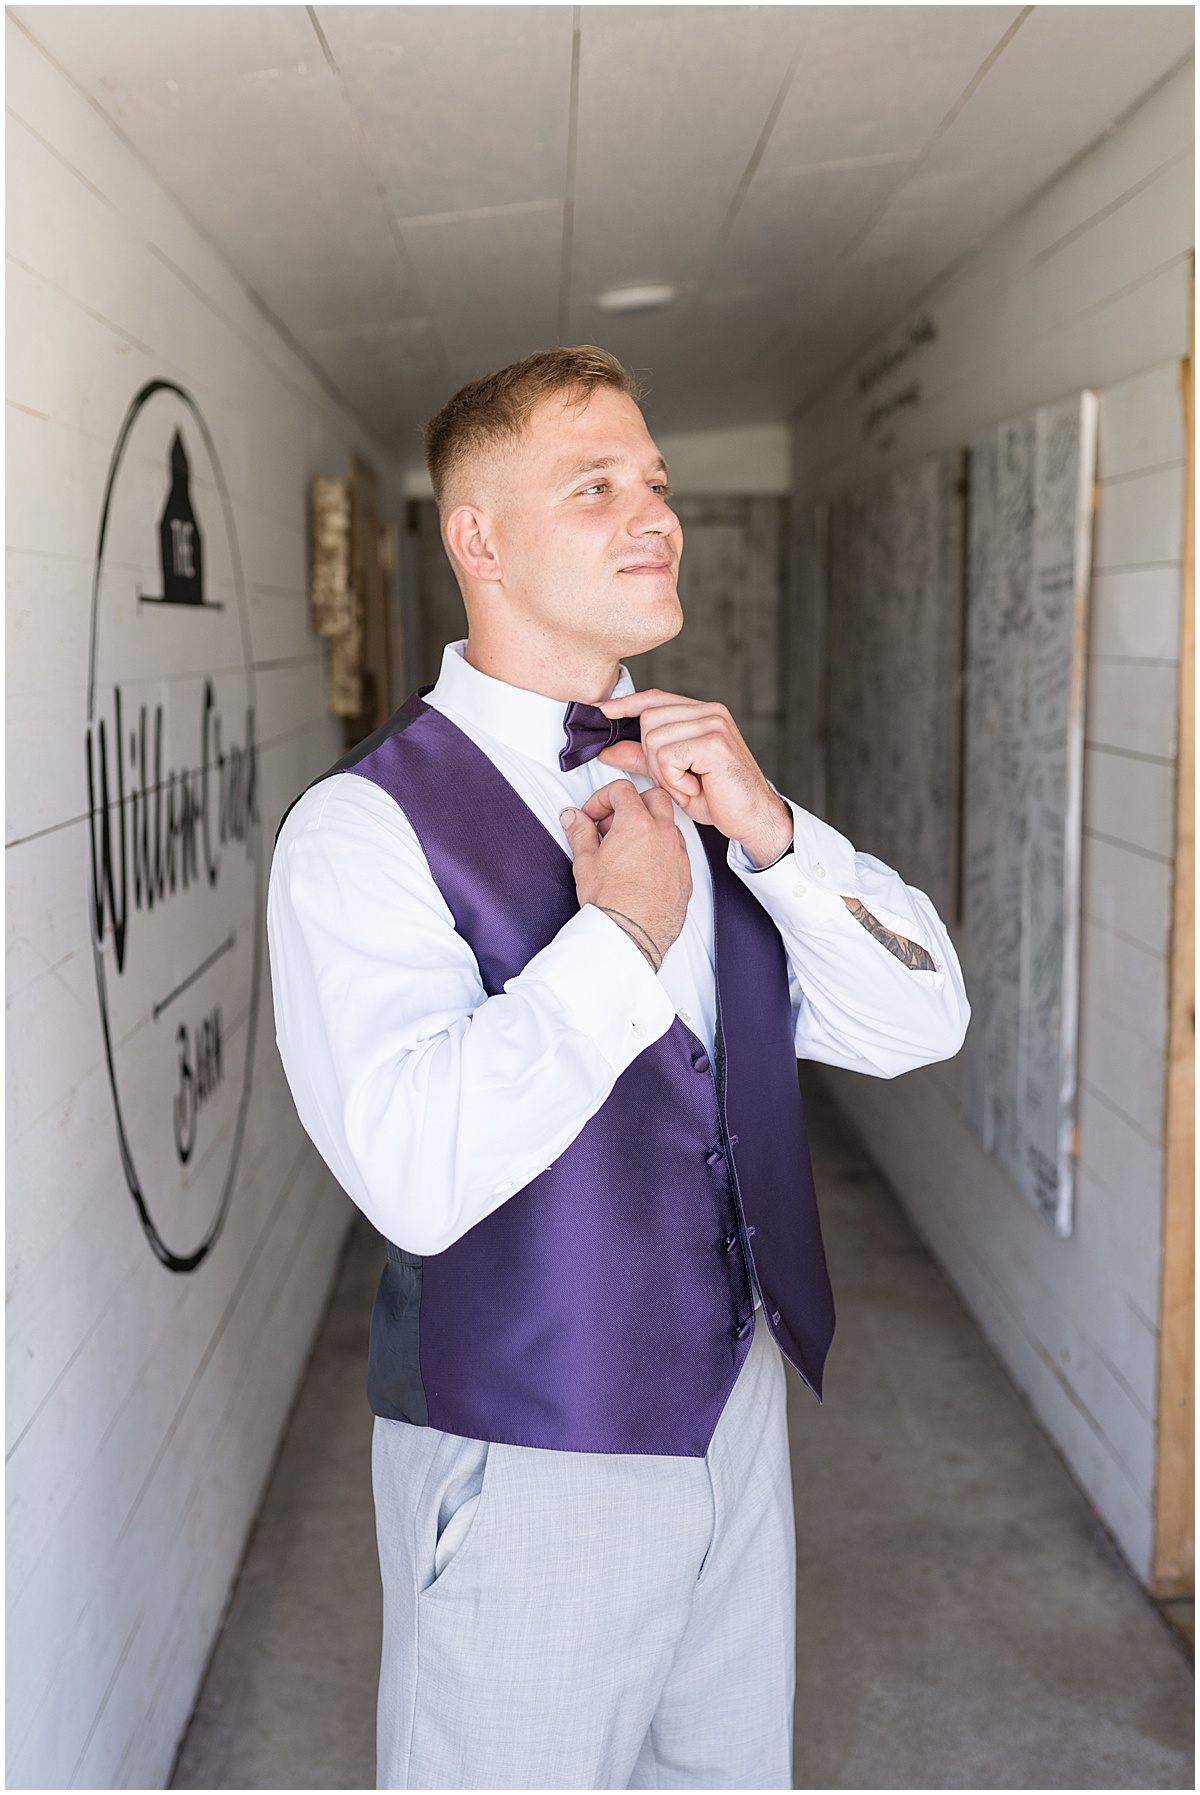 Groom puts on purple bow tie at White Willow Creek Barn wedding in Frankfort, Indiana